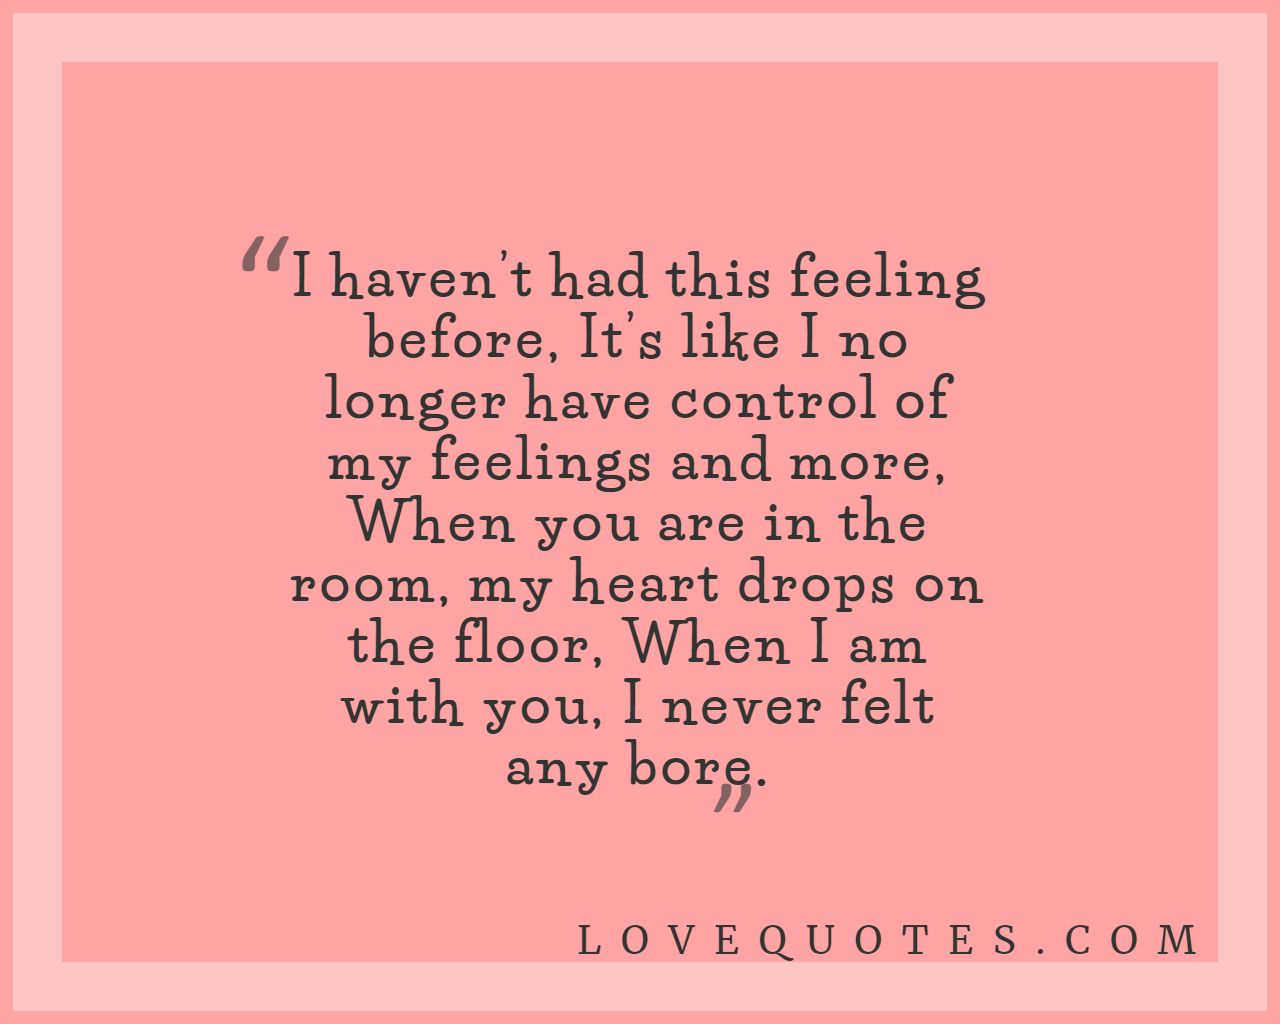 This Feeling - Love Quotes